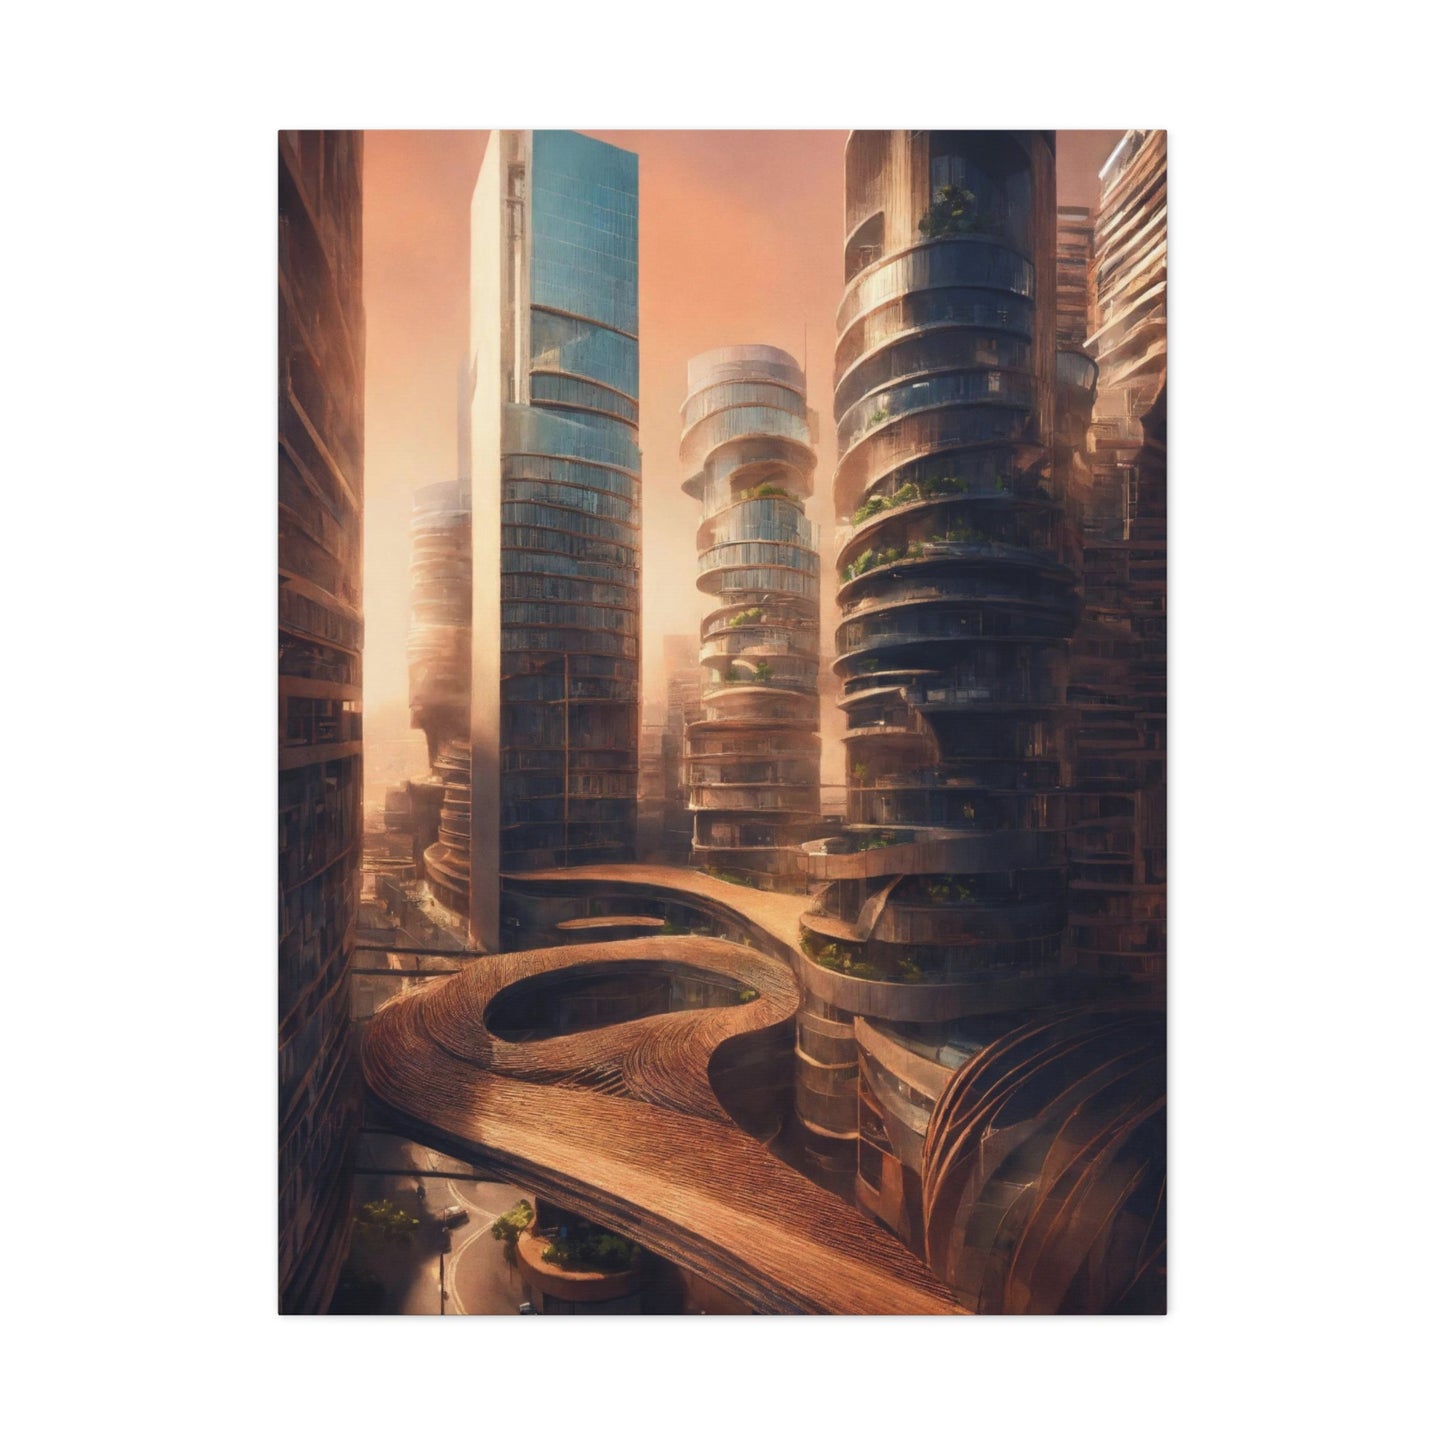 "Elegy in Copper: The Surrendered City"